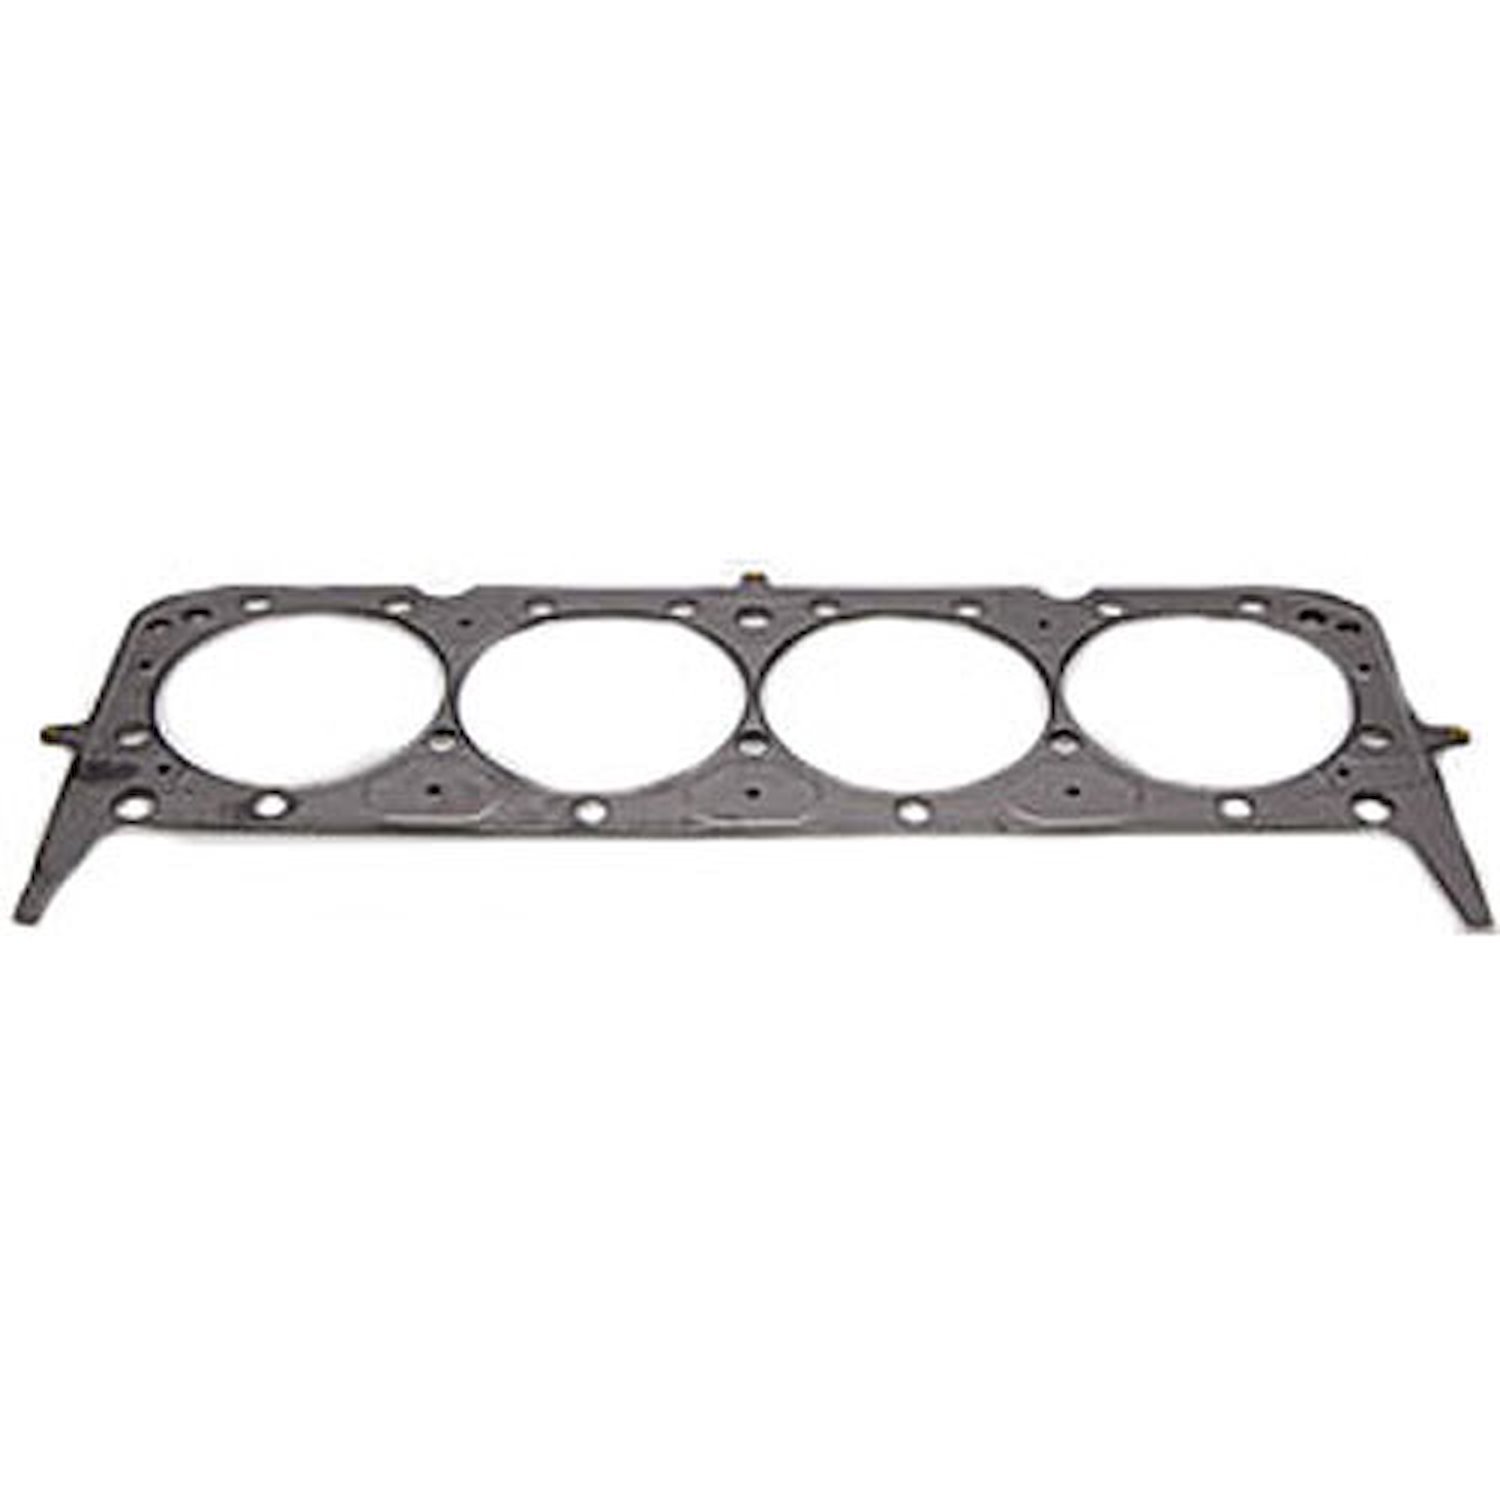 Small-Block Chevy Head Gasket 265-400 18° & 23°